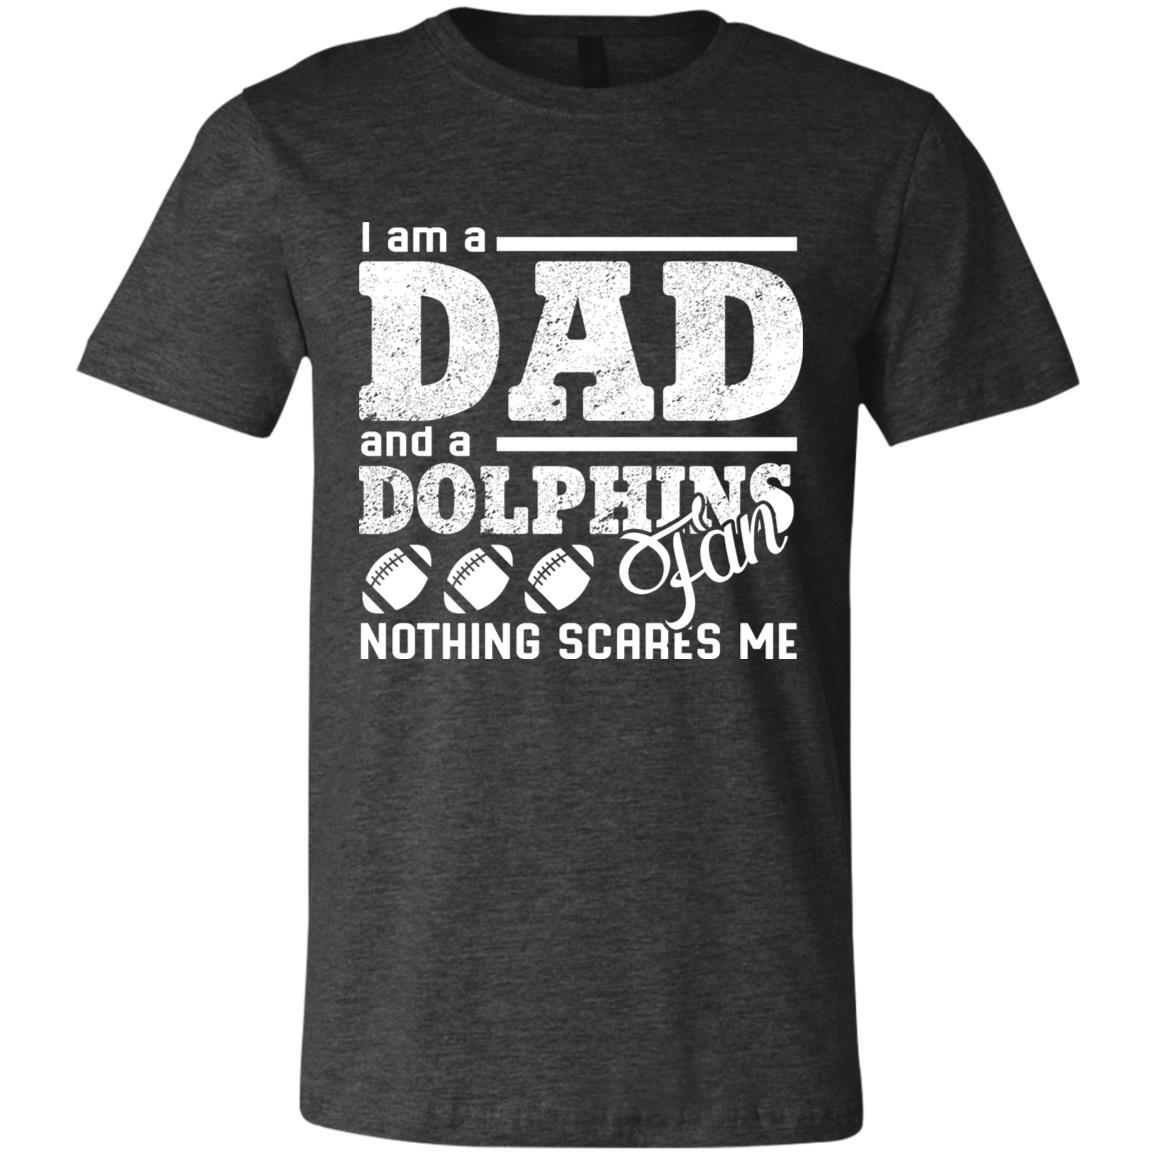 Miami Dolphins Shop - I Am A Dad And A Fan Nothing Scares Me Miami Dolphins Tshirt 2